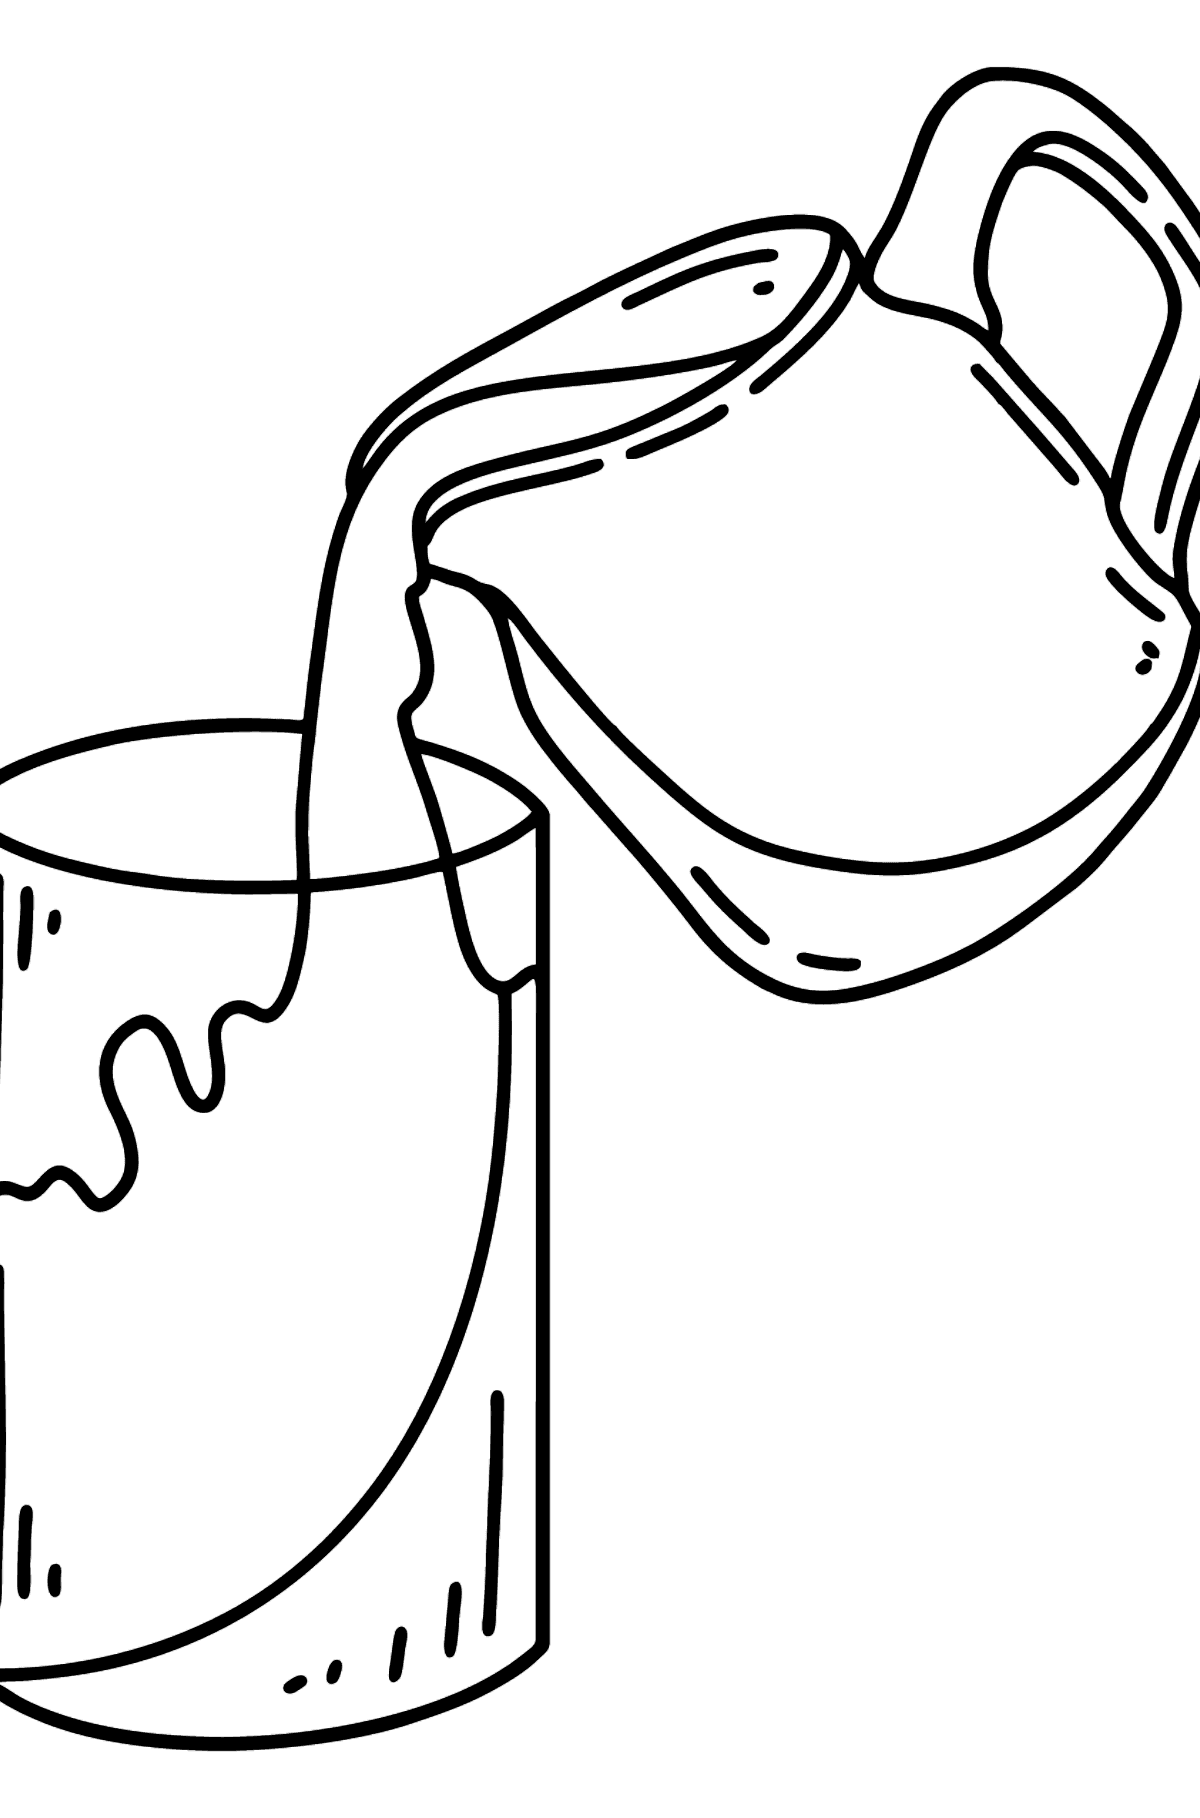 Milk and Milk Jug coloring page - Coloring Pages for Kids